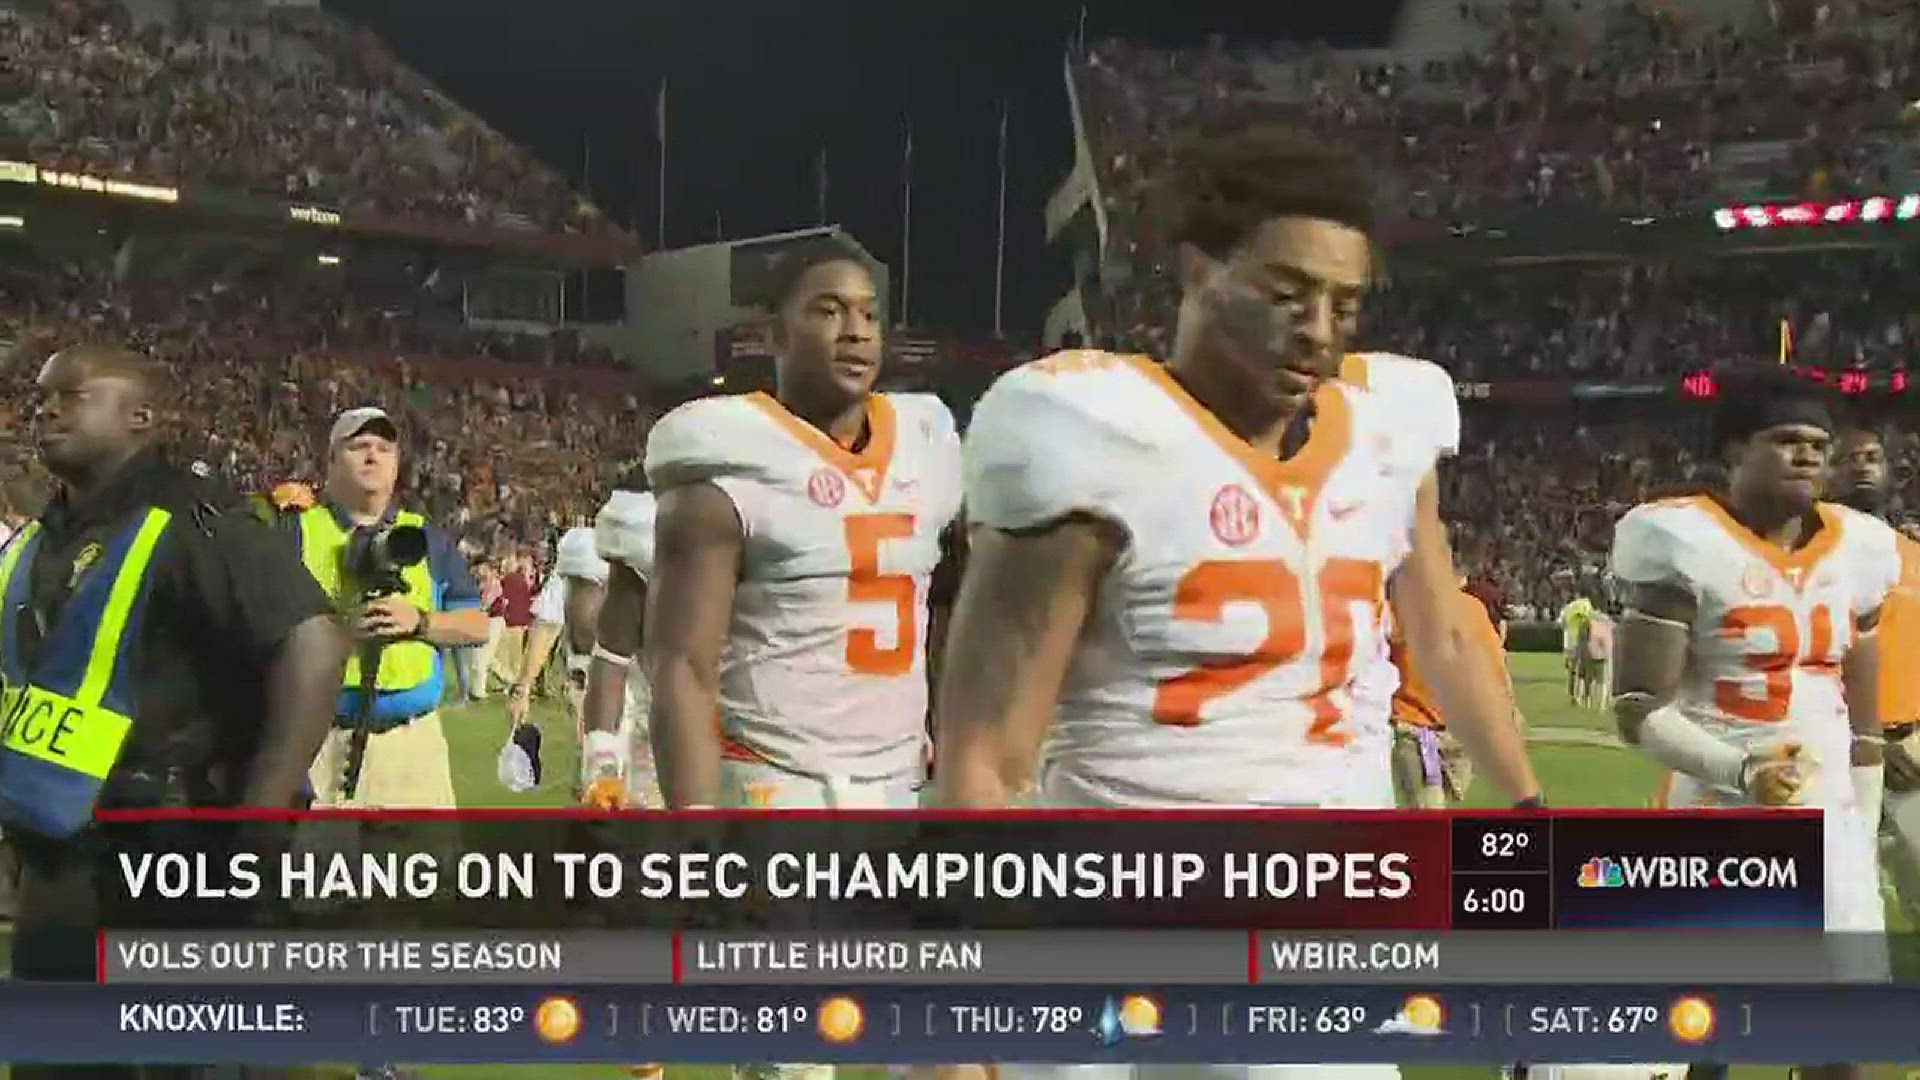 Oct. 31, 2016: WBIR Sports Anchor Patrick Murray breaks down the top three UT football topics fans are talking about following the Vols' loss to South Carolina.